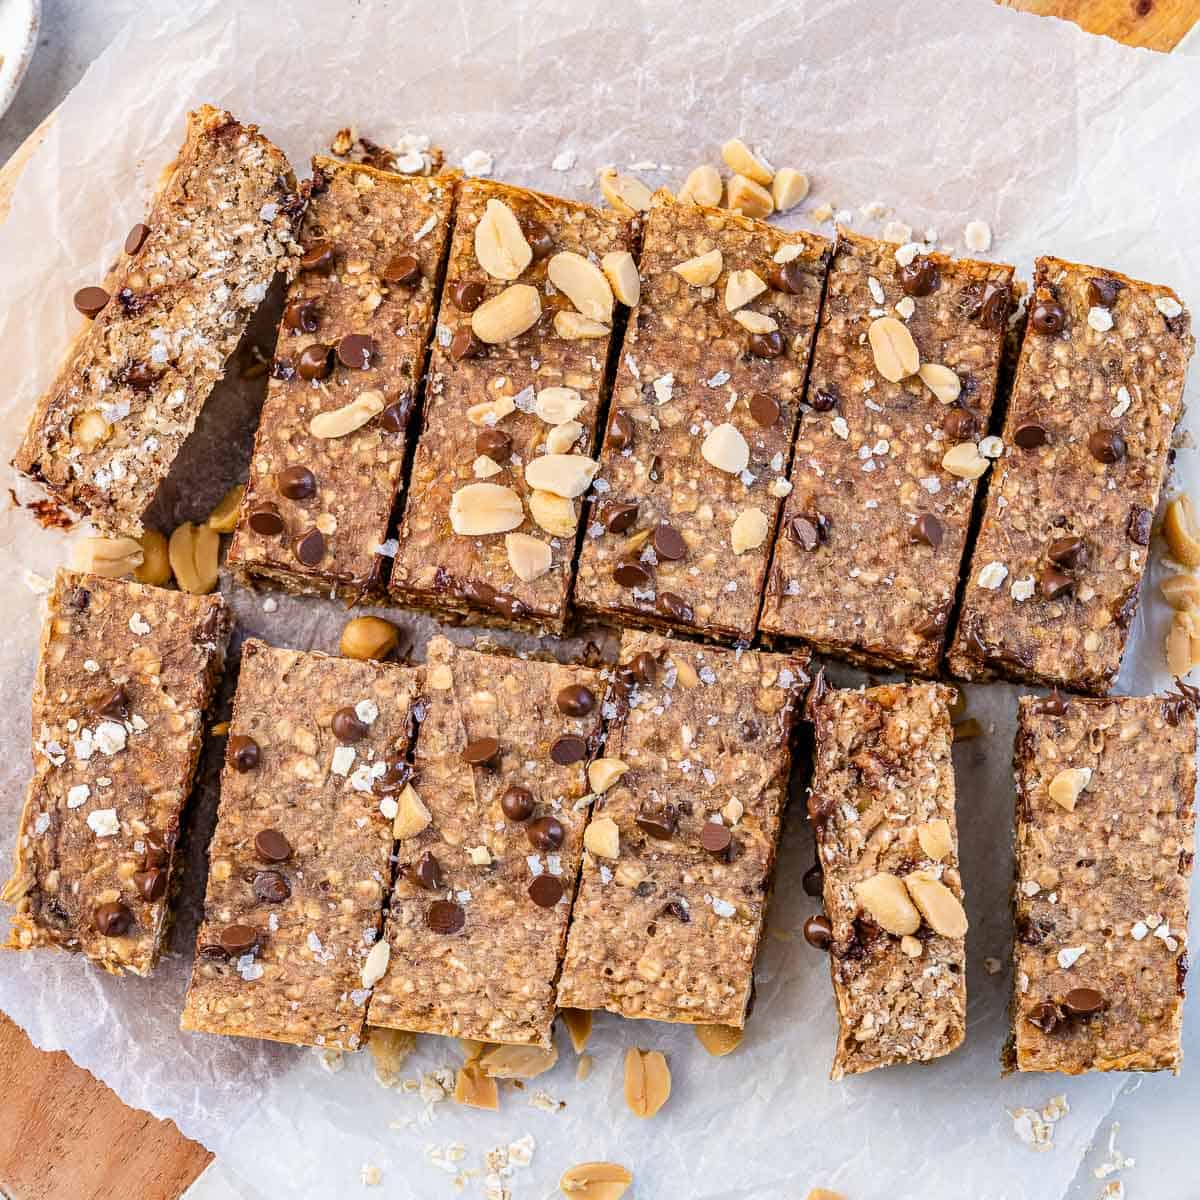 top view of oatmeal bar squares topped with peanuts on a parchment paper